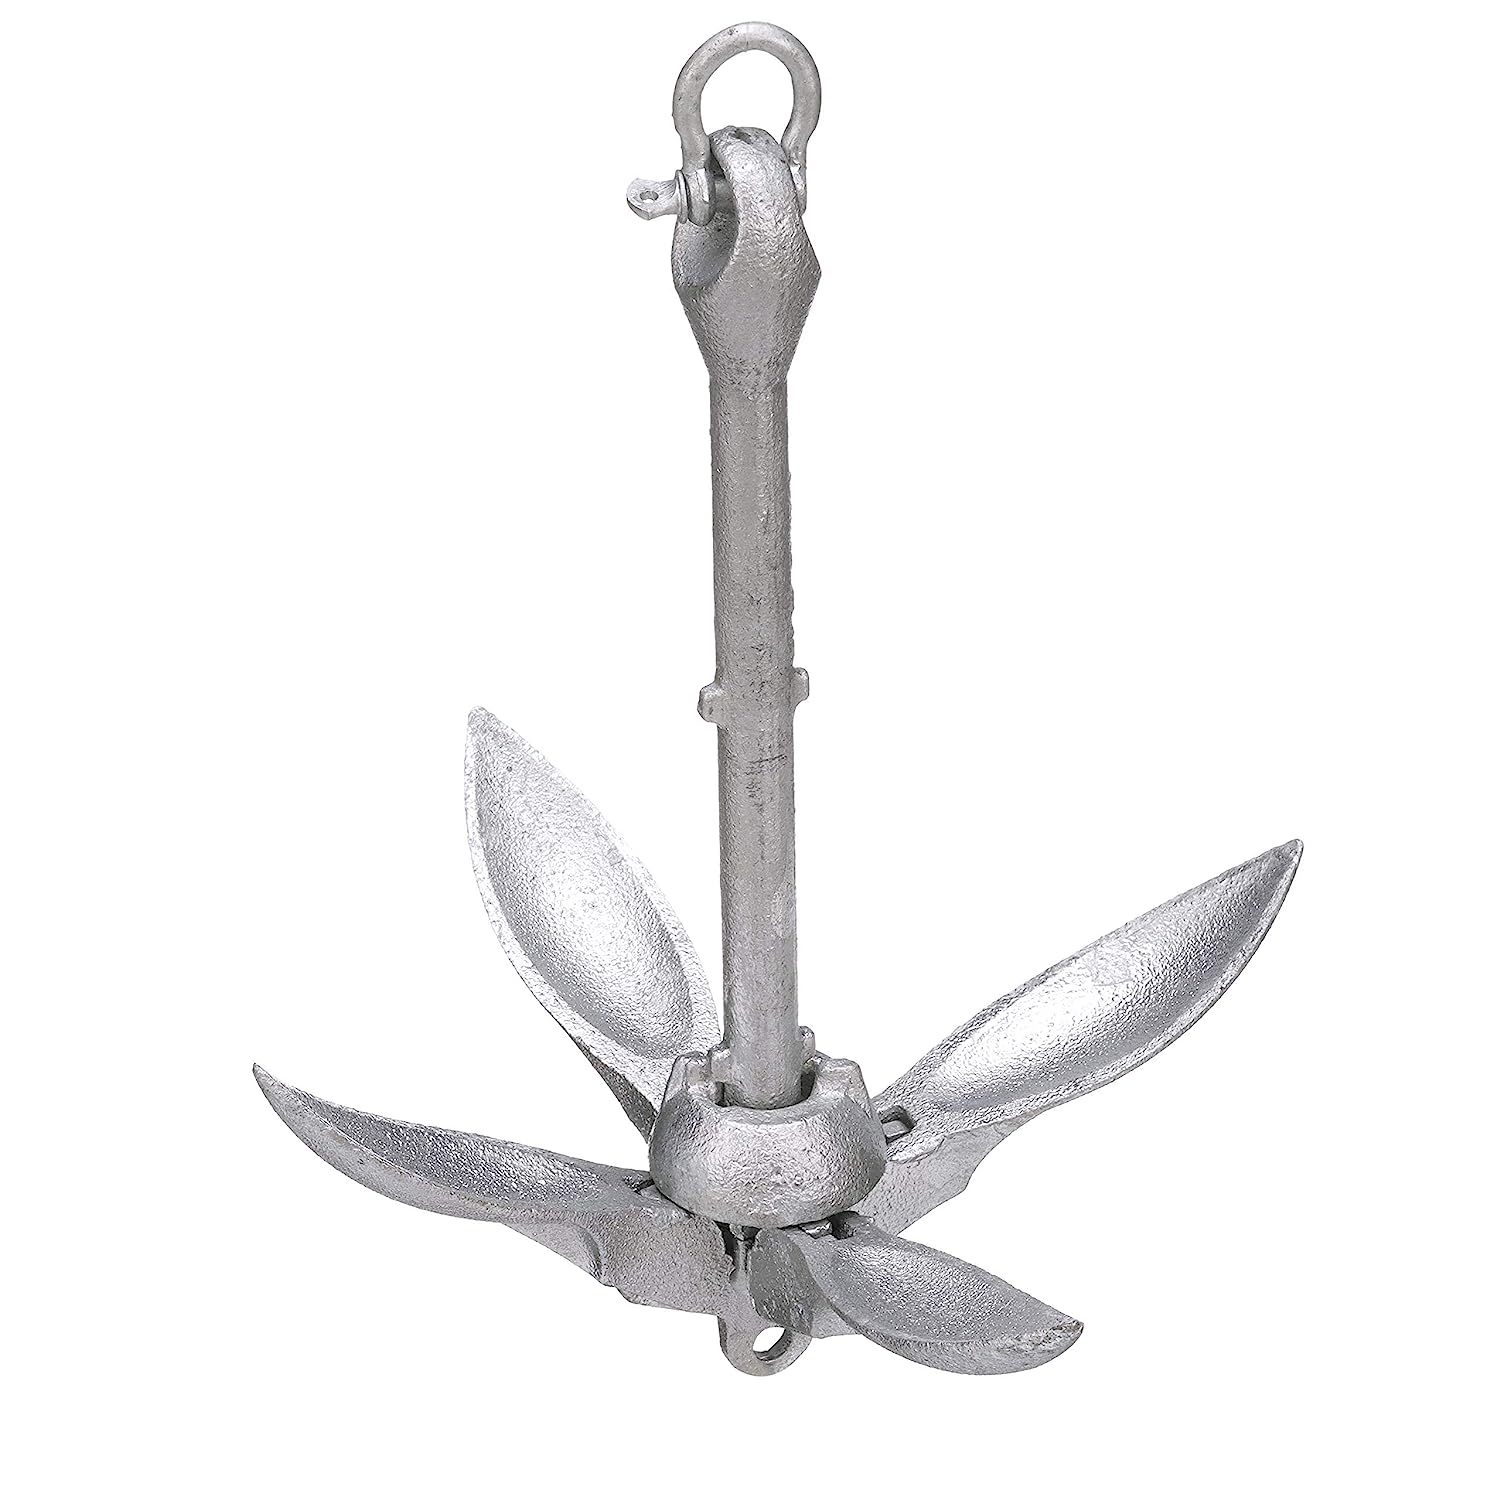 Primary image for Folding Grapnel Anchor 1-1/2 Lbs. 41050